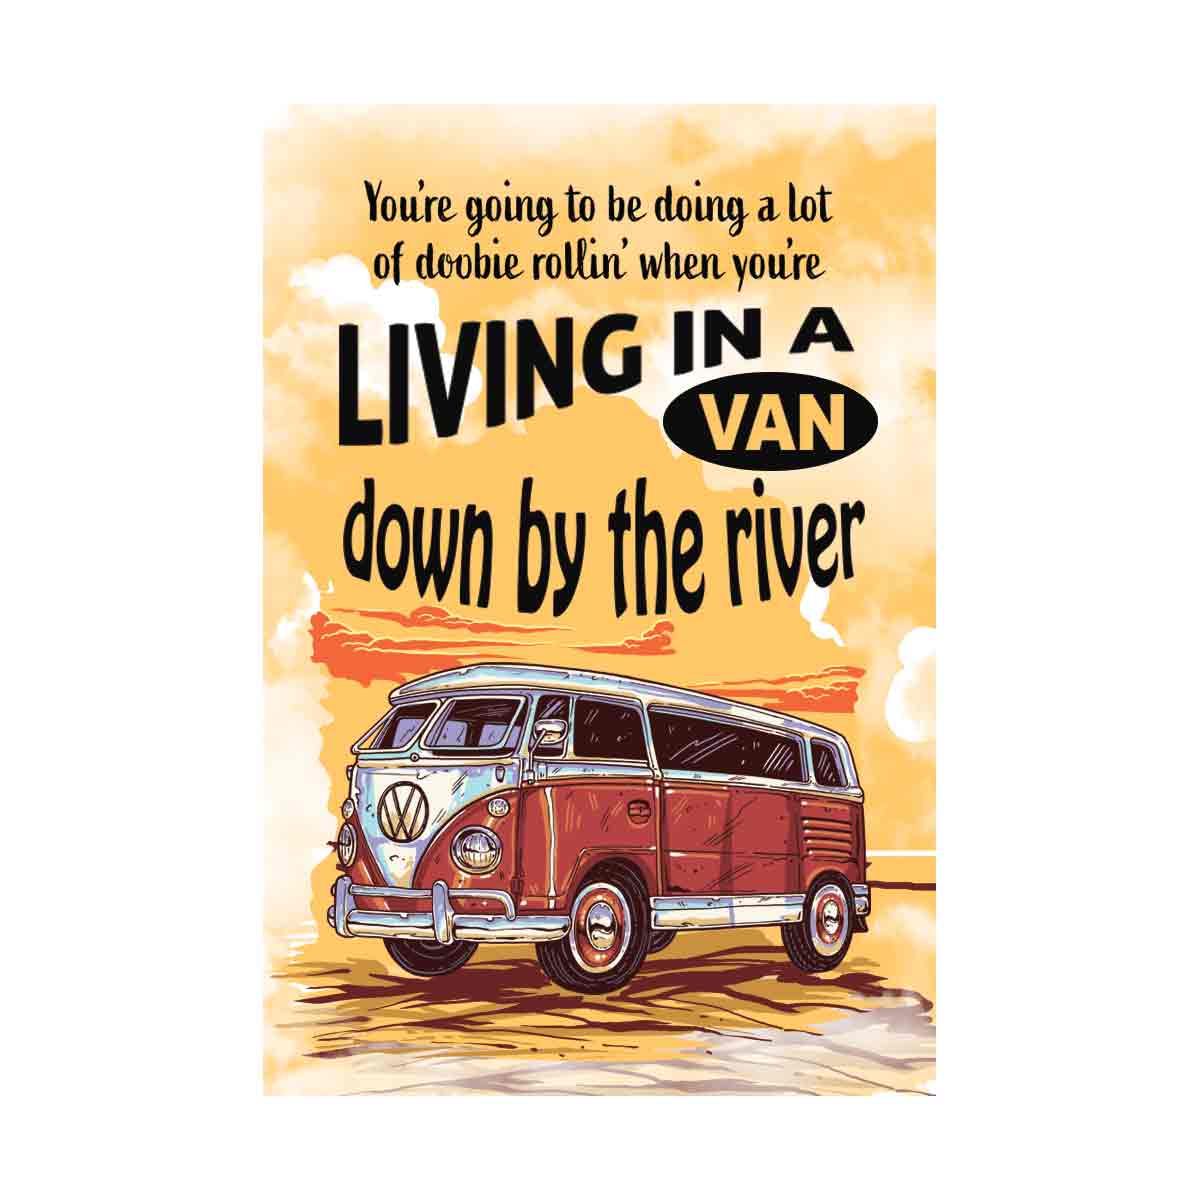 Living in a Van by the River